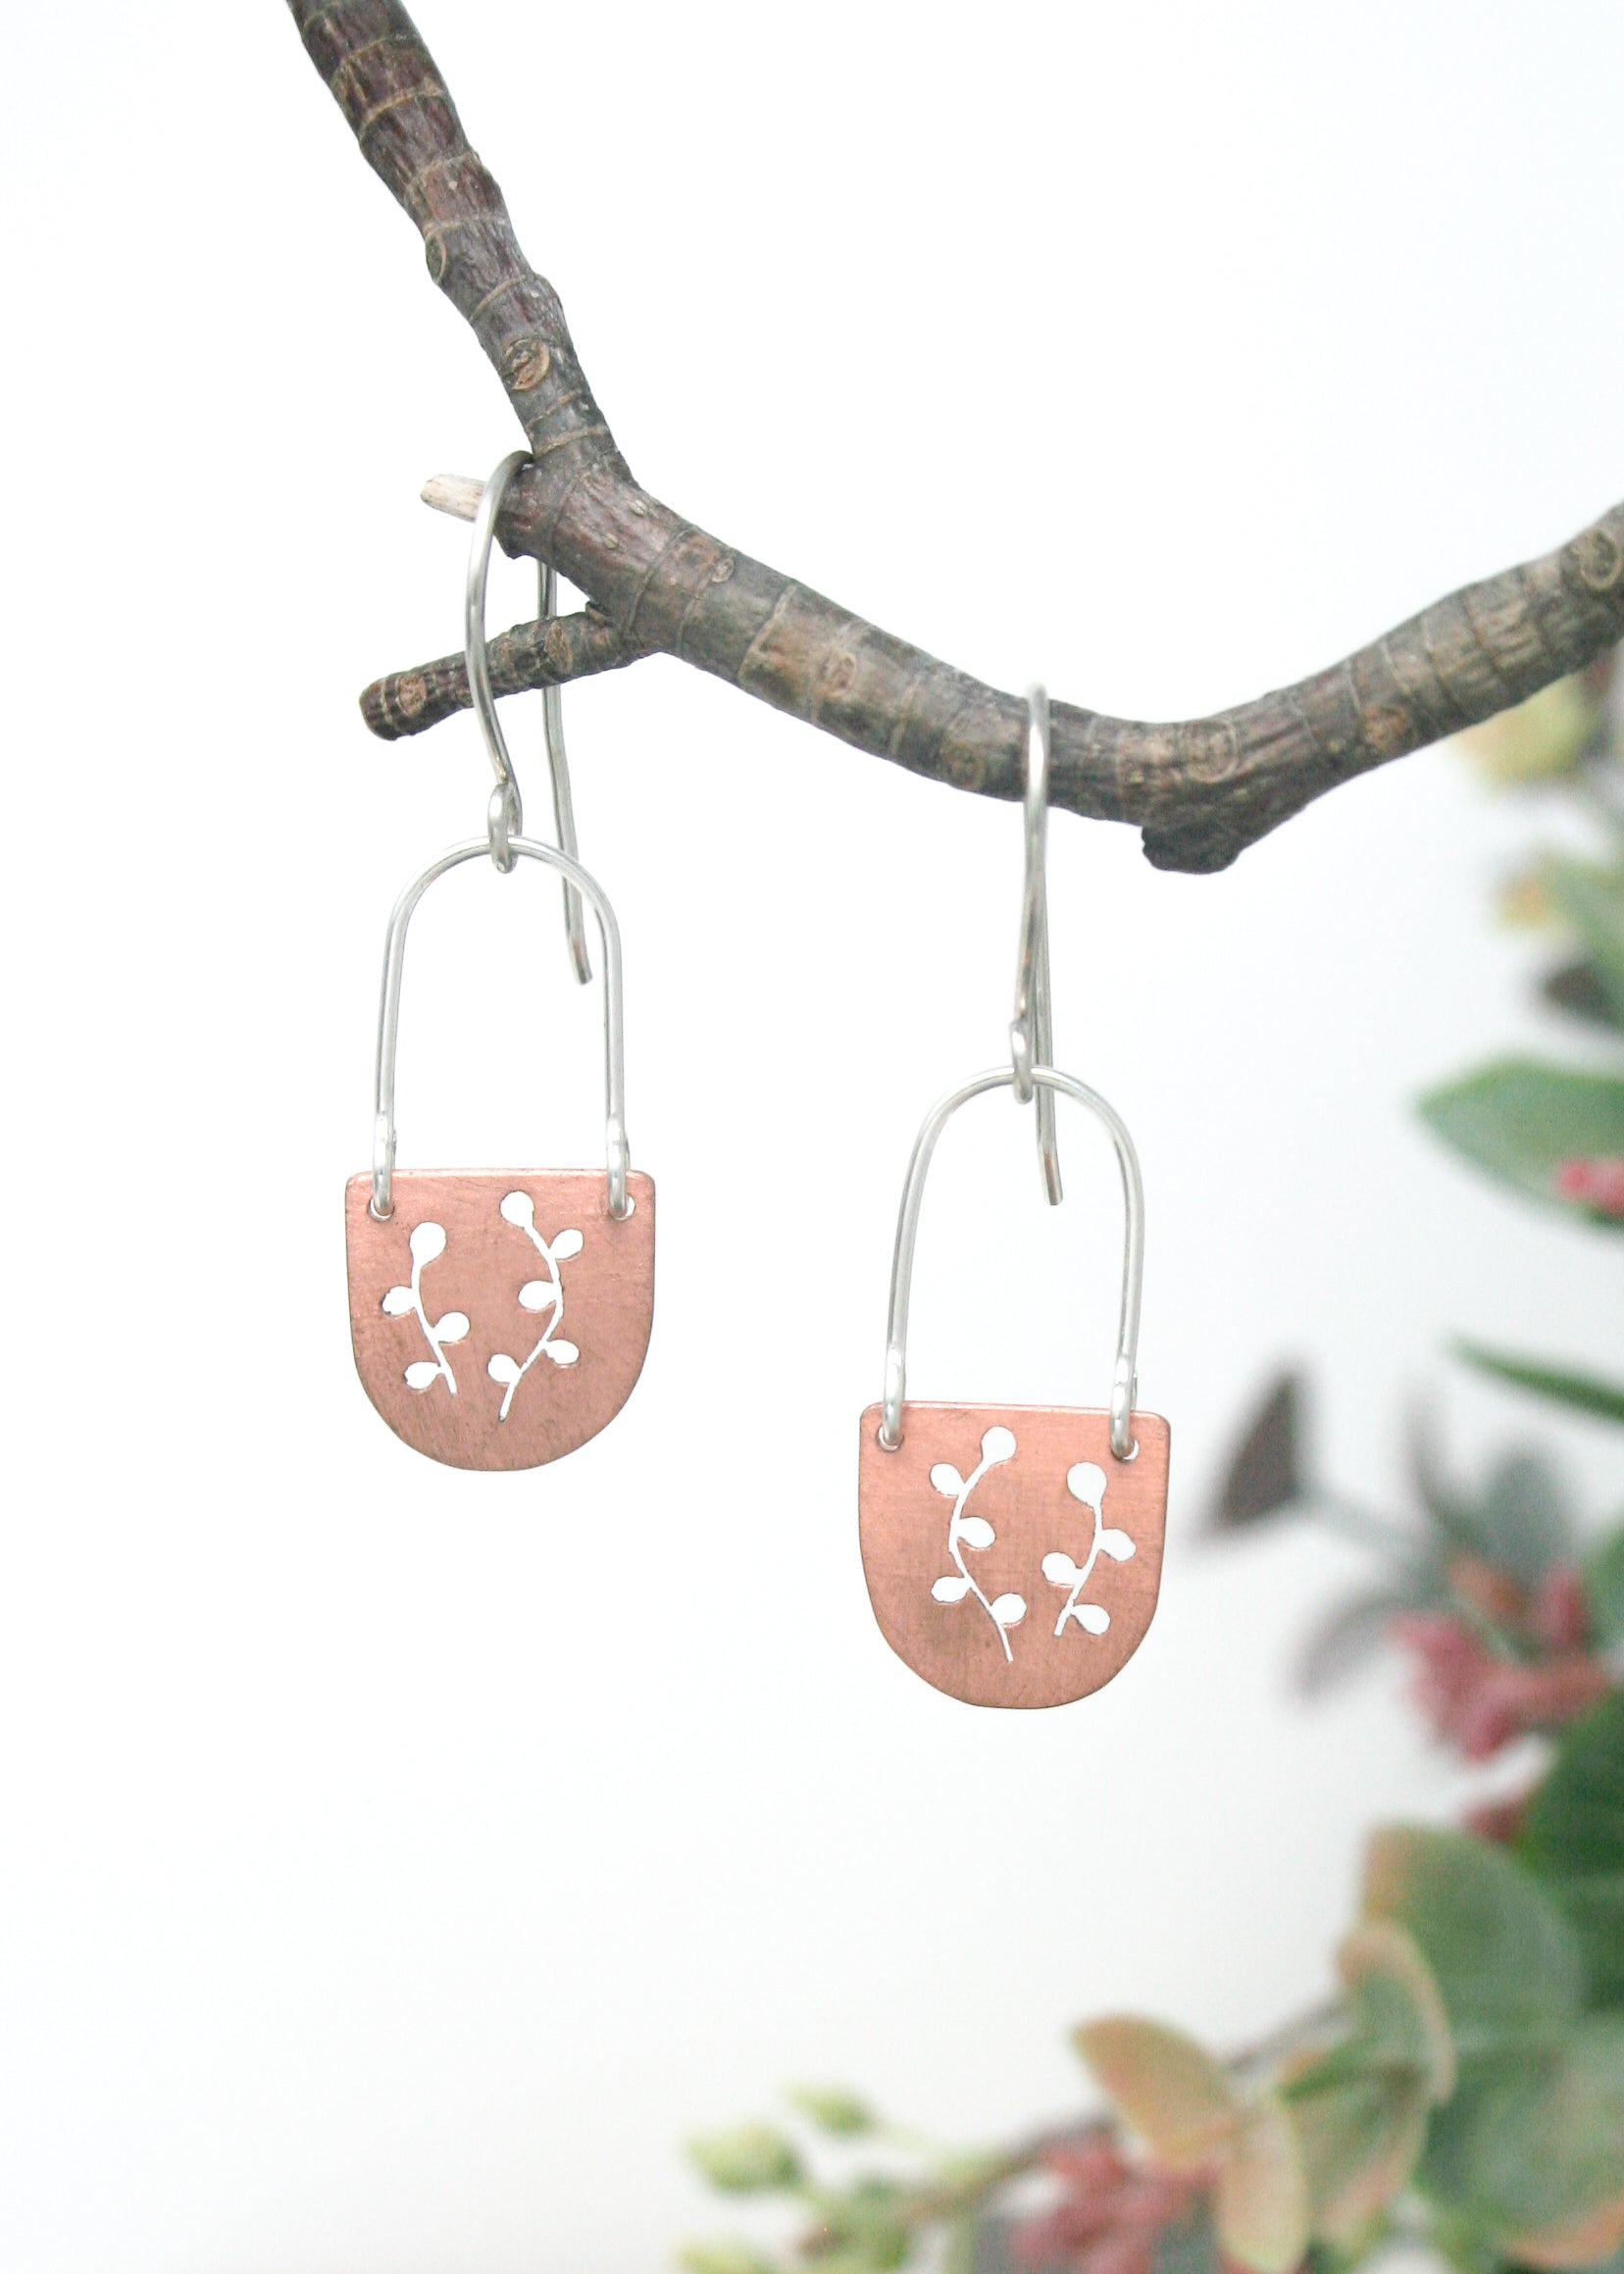 a pair of earrings hanging from a tree branch